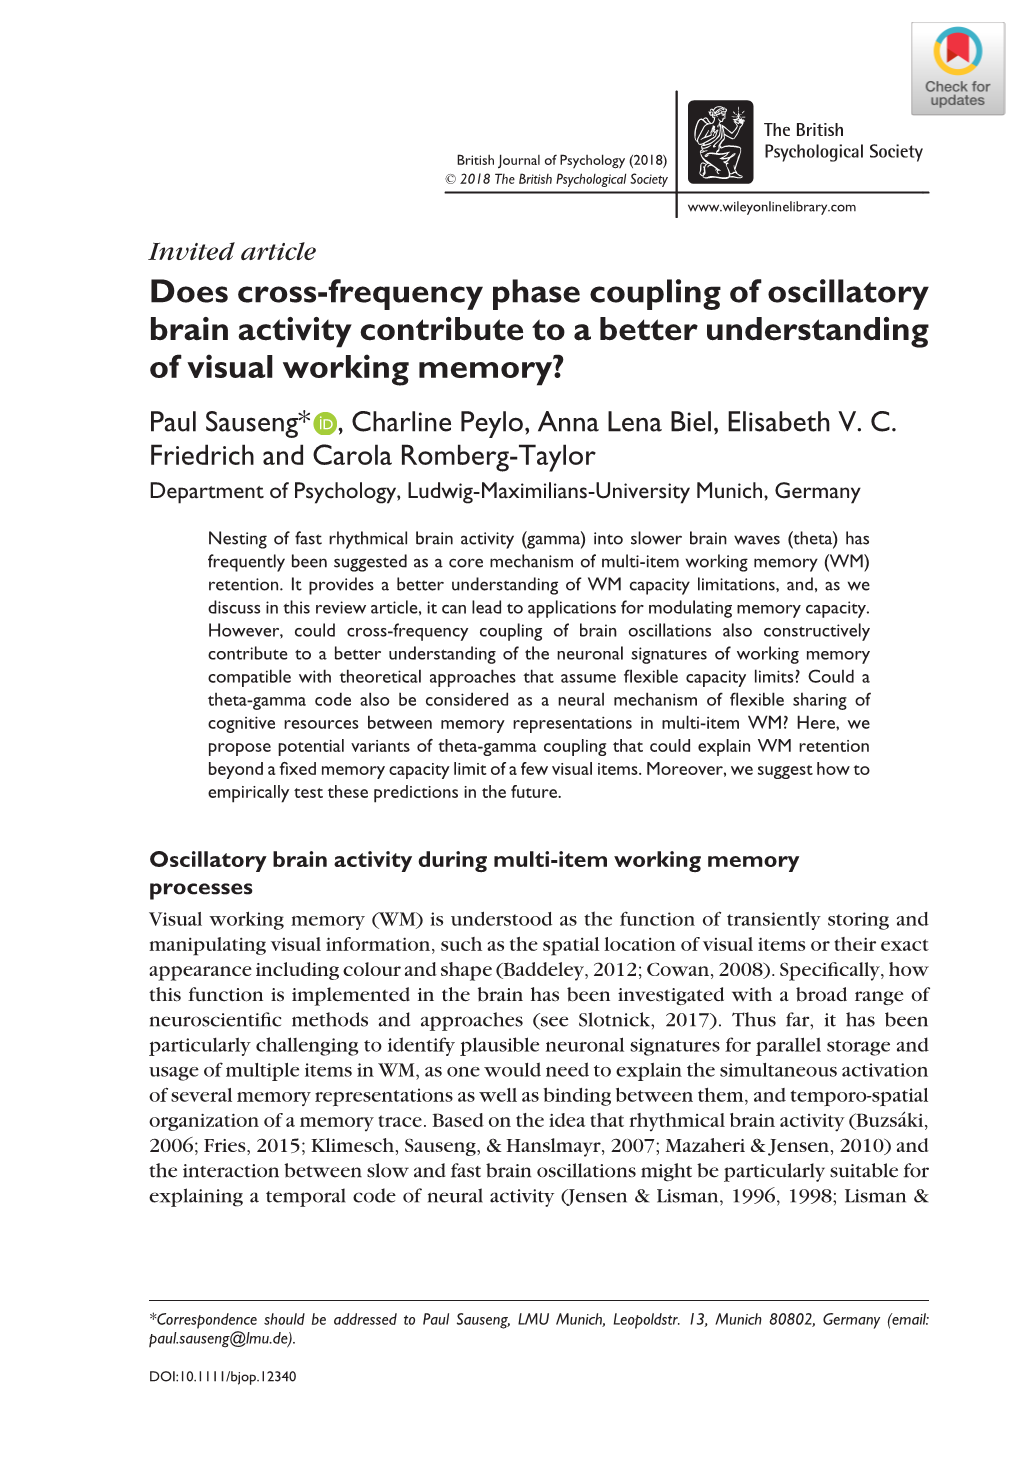 Does Cross‐Frequency Phase Coupling of Oscillatory Brain Activity